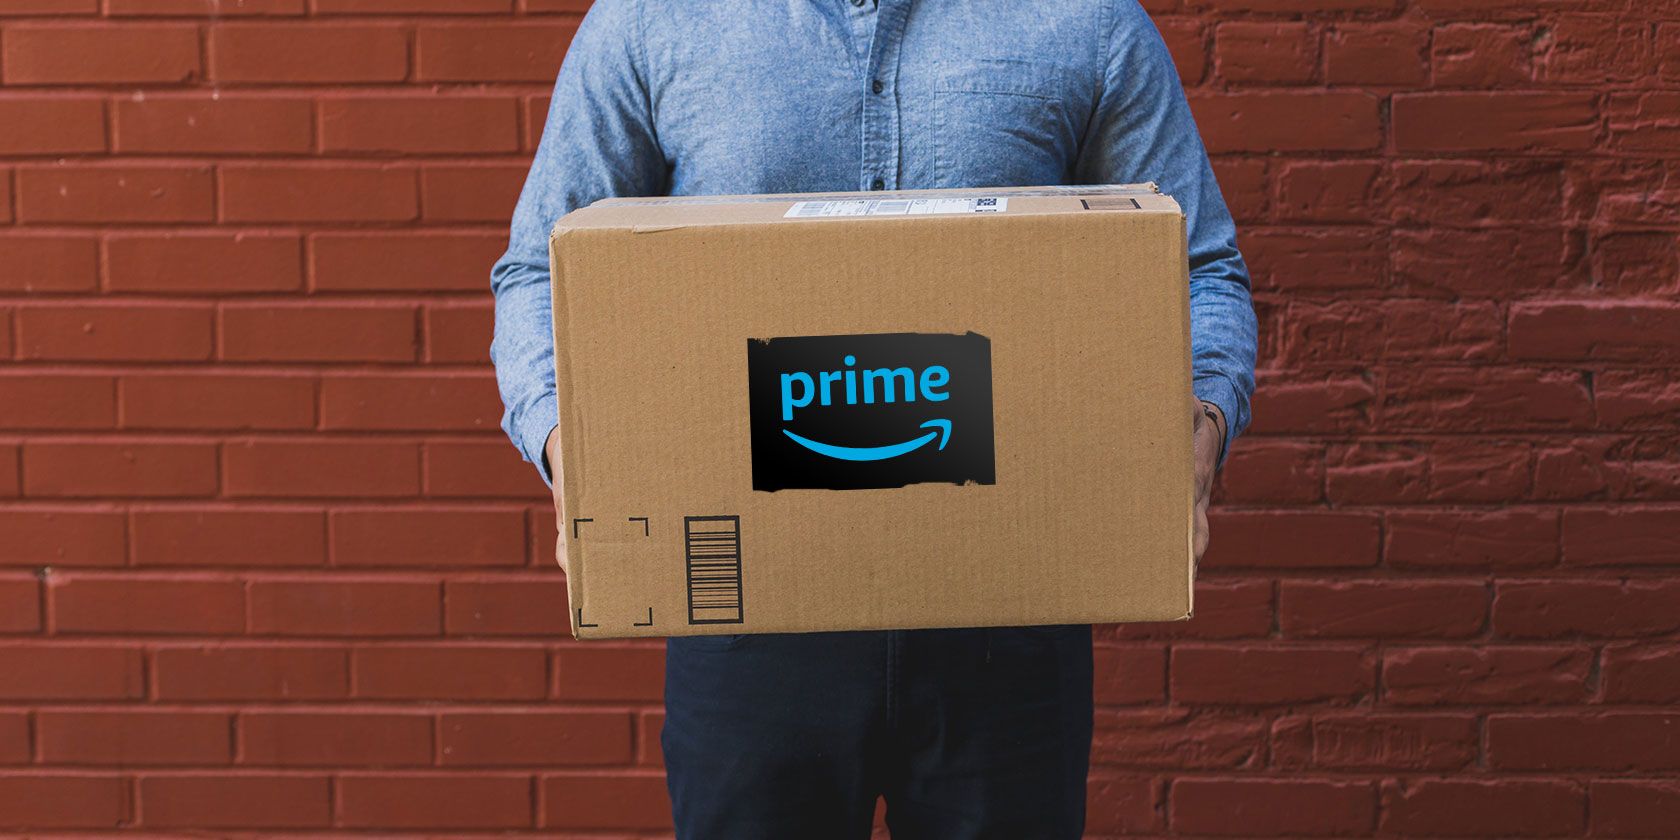 Expands Prime Free One-Day Delivery to 13 More Cities in Canada  [LIST] • iPhone in Canada Blog